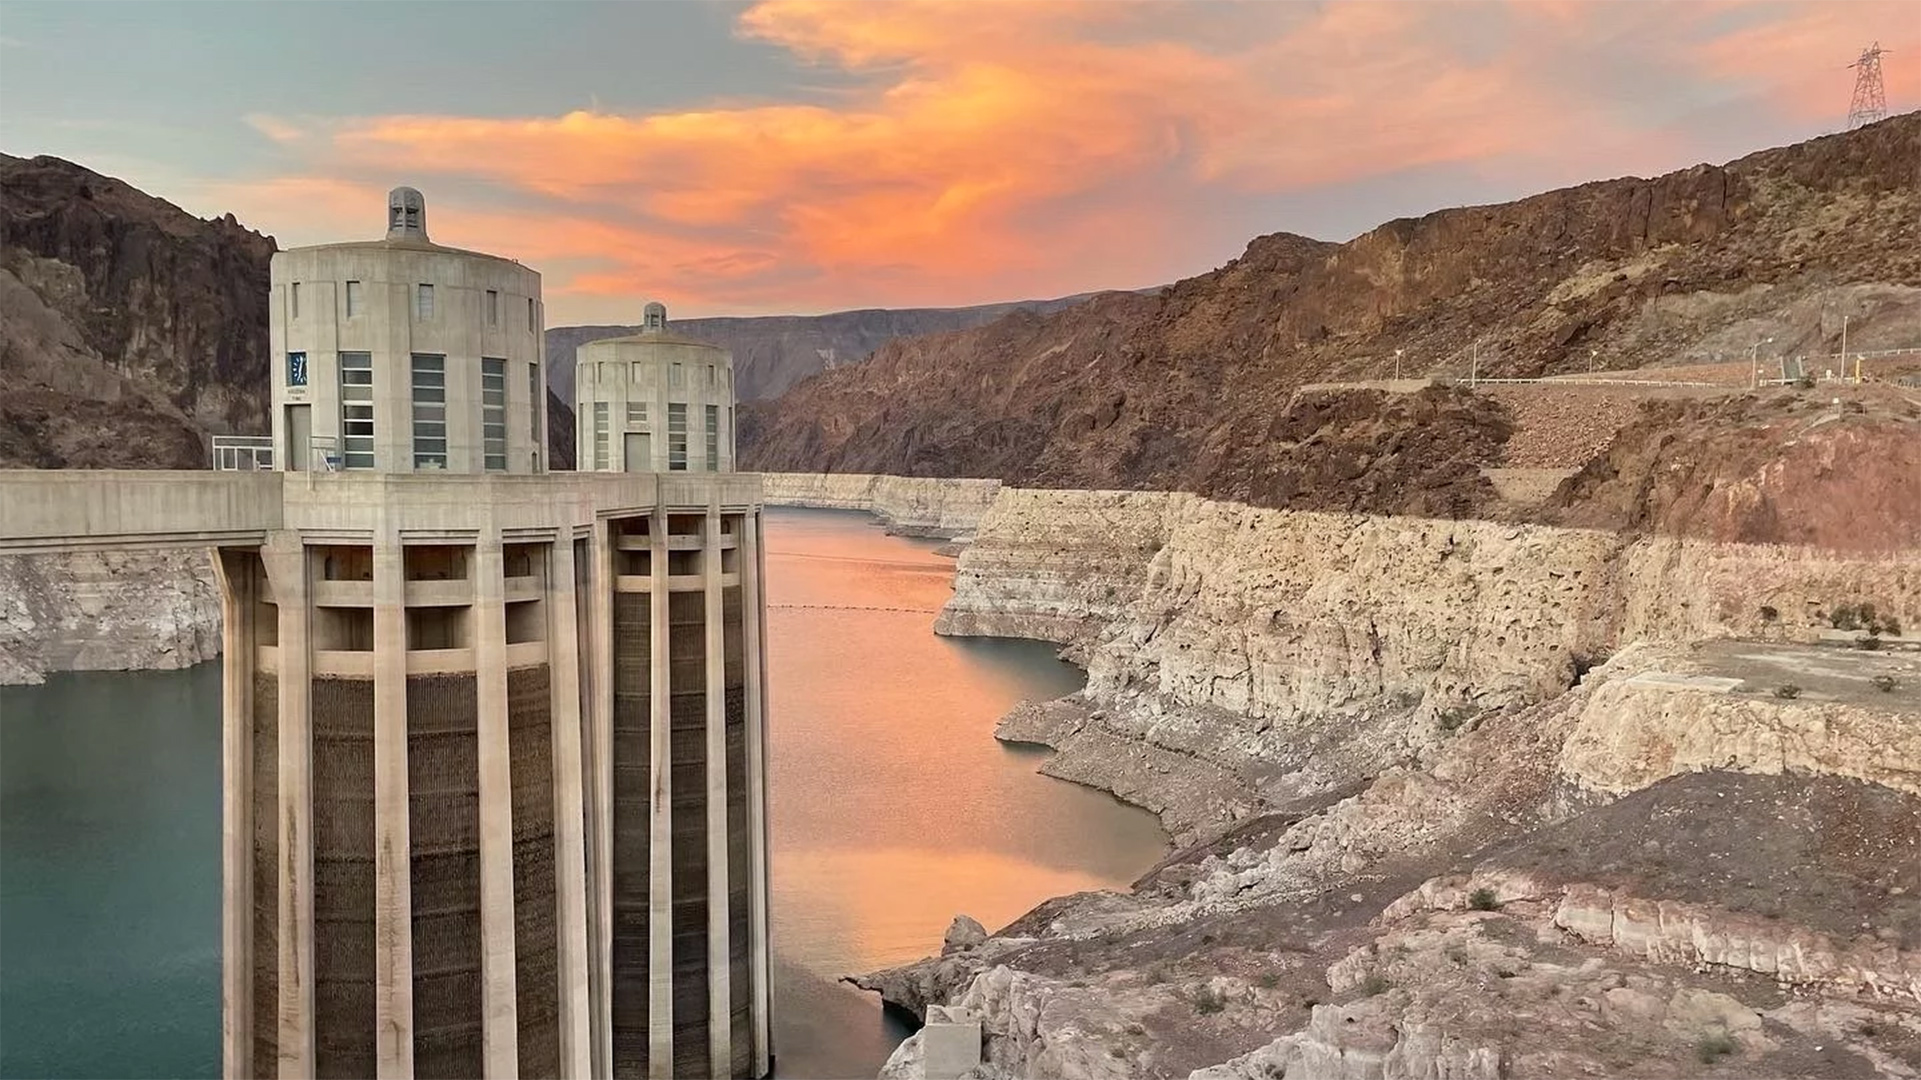 Lake Mead, the largest reservoir in the nation, has shrunk so low there's concern the Hoover Dam will soon be unable to generate hydropower